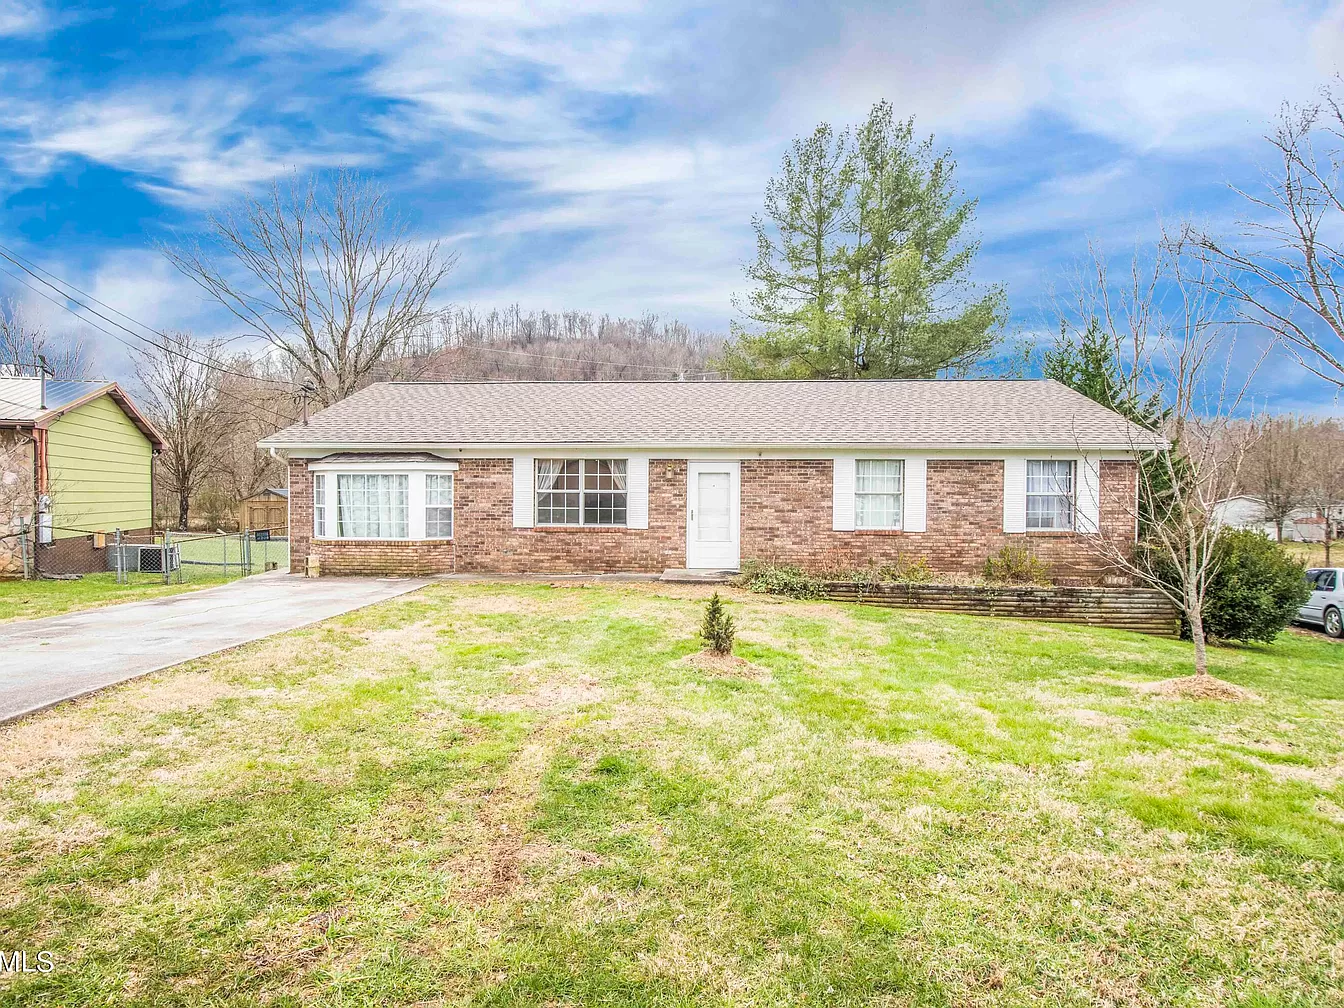 6907 Maize Dr, Knoxville, TN 37918 | Zillow